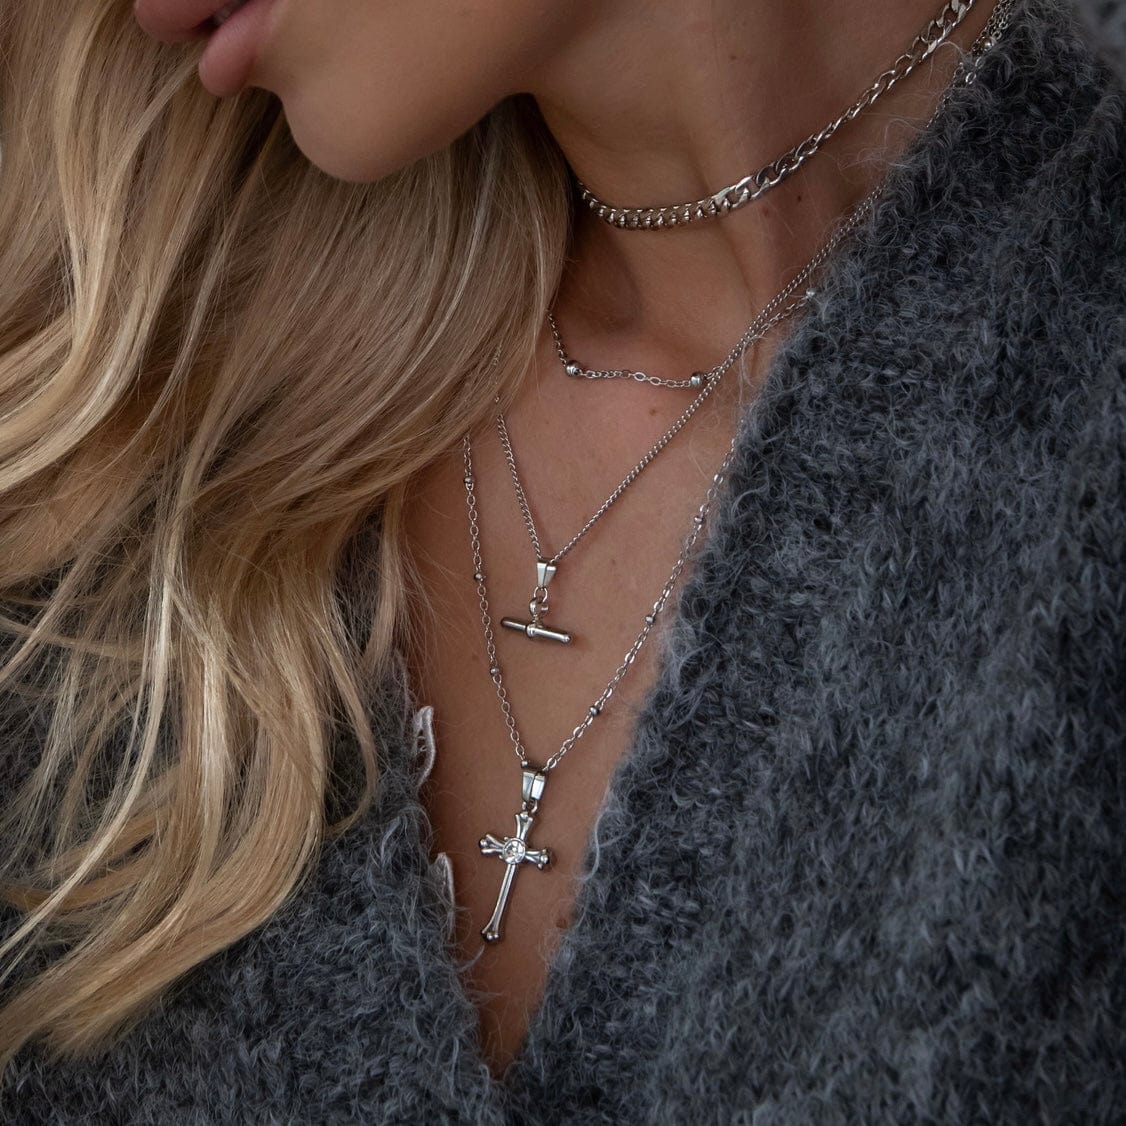 BohoMoon Stainless Steel Dainty Ball Choker / Necklace